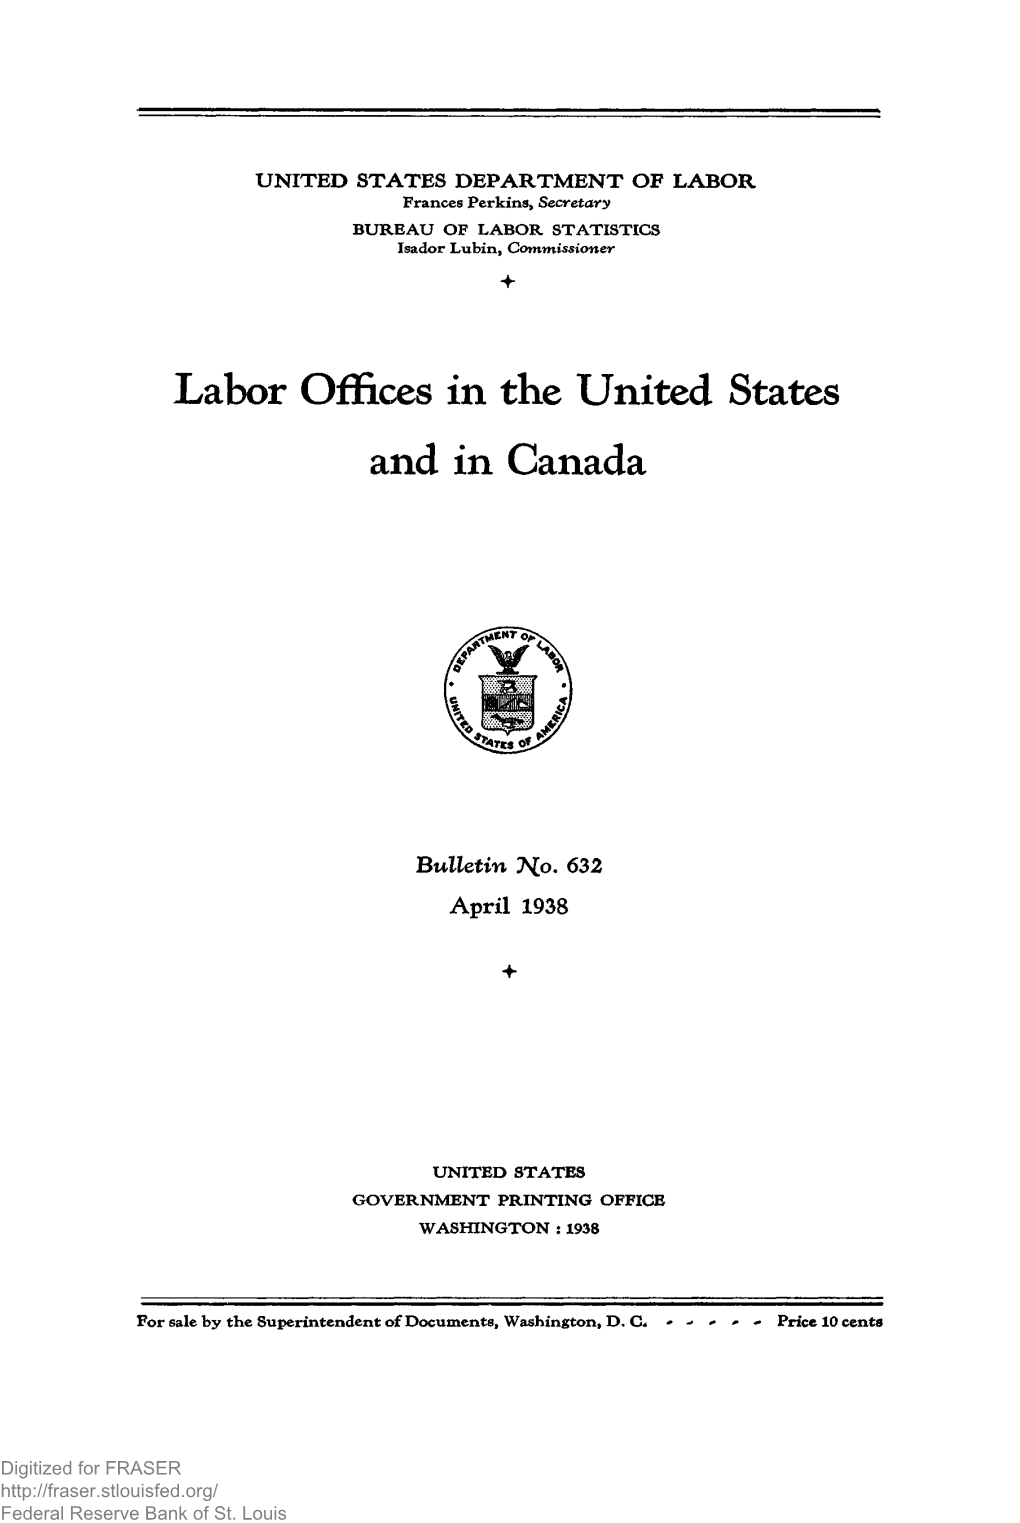 Labor Offices in the United States and Canada